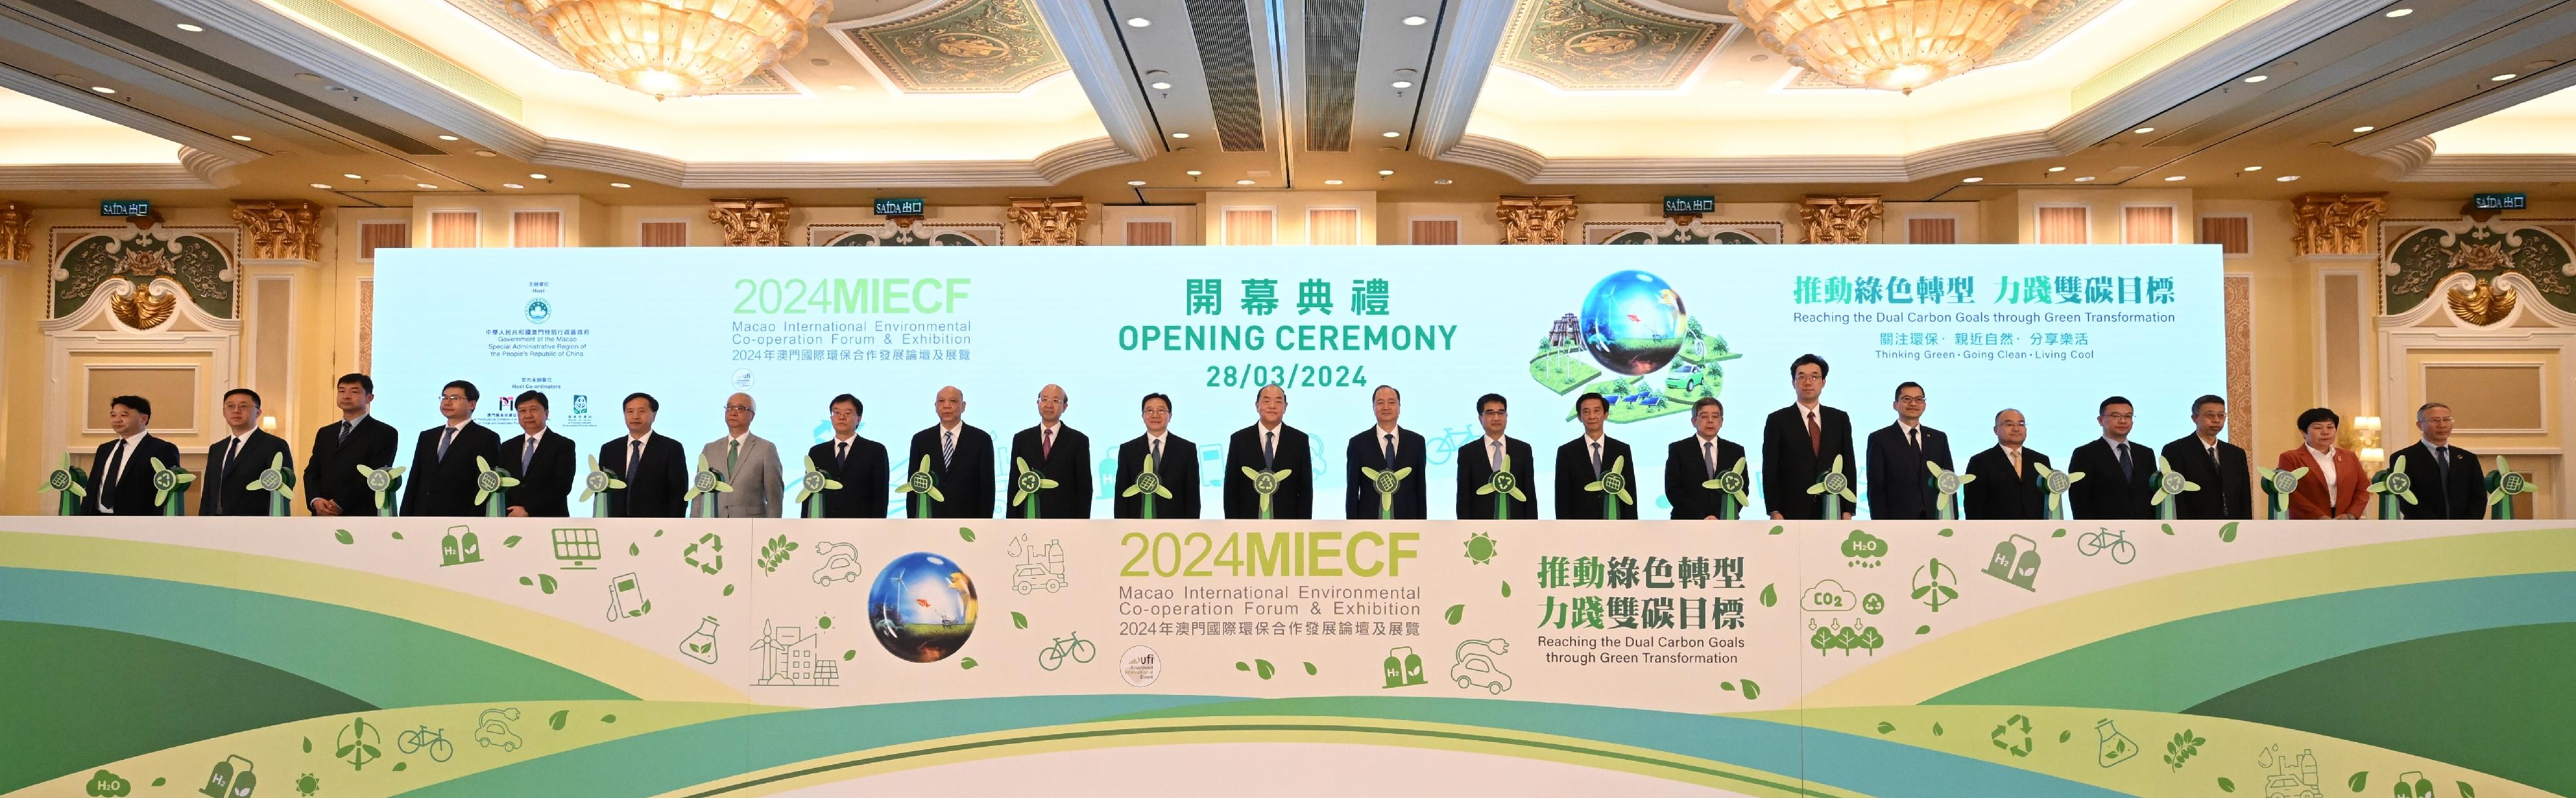 The Secretary for Environment and Ecology, Mr Tse Chin-wan, today (March 28) led a delegation to attend the 2024 Macao International Environmental Co-operation Forum & Exhibition (MIECF) in Macao. Photo shows Mr Tse (seventh left), Macao Special Administrative Region Government officials and other guests officiating at the opening ceremony of the MIECF.